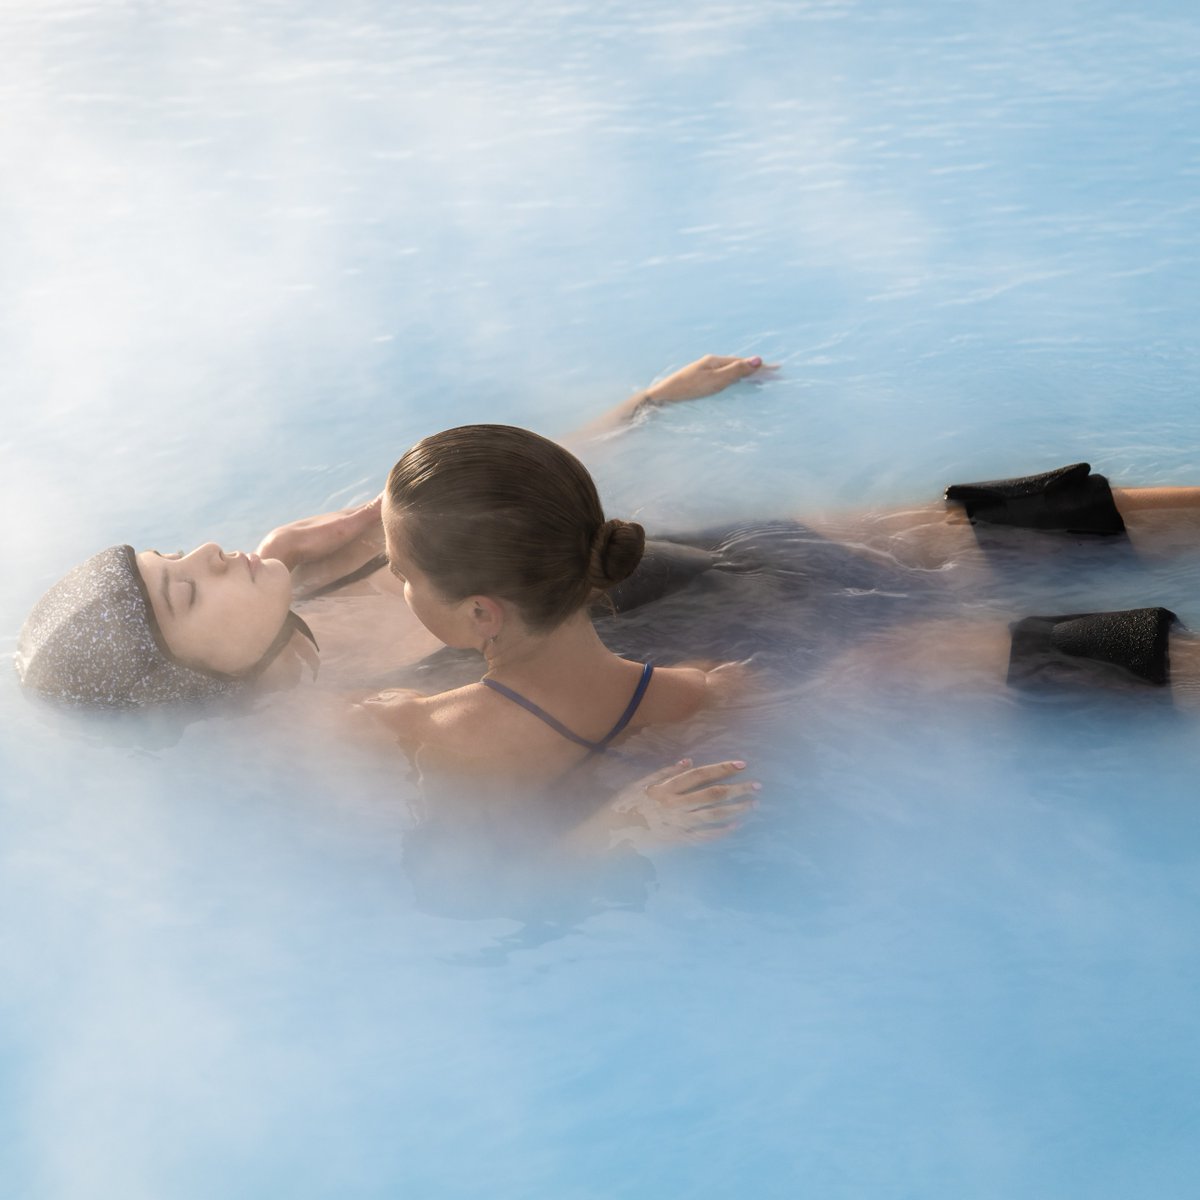 Did you know we offer float therapy? 💙 Immerse yourself in a deep state of relaxation that lets your mind rest and rejuvenate. Float therapy is all about letting go—surrender to the experience and drift into a world of profound calm. #BlueLagoonIceland #Iceland